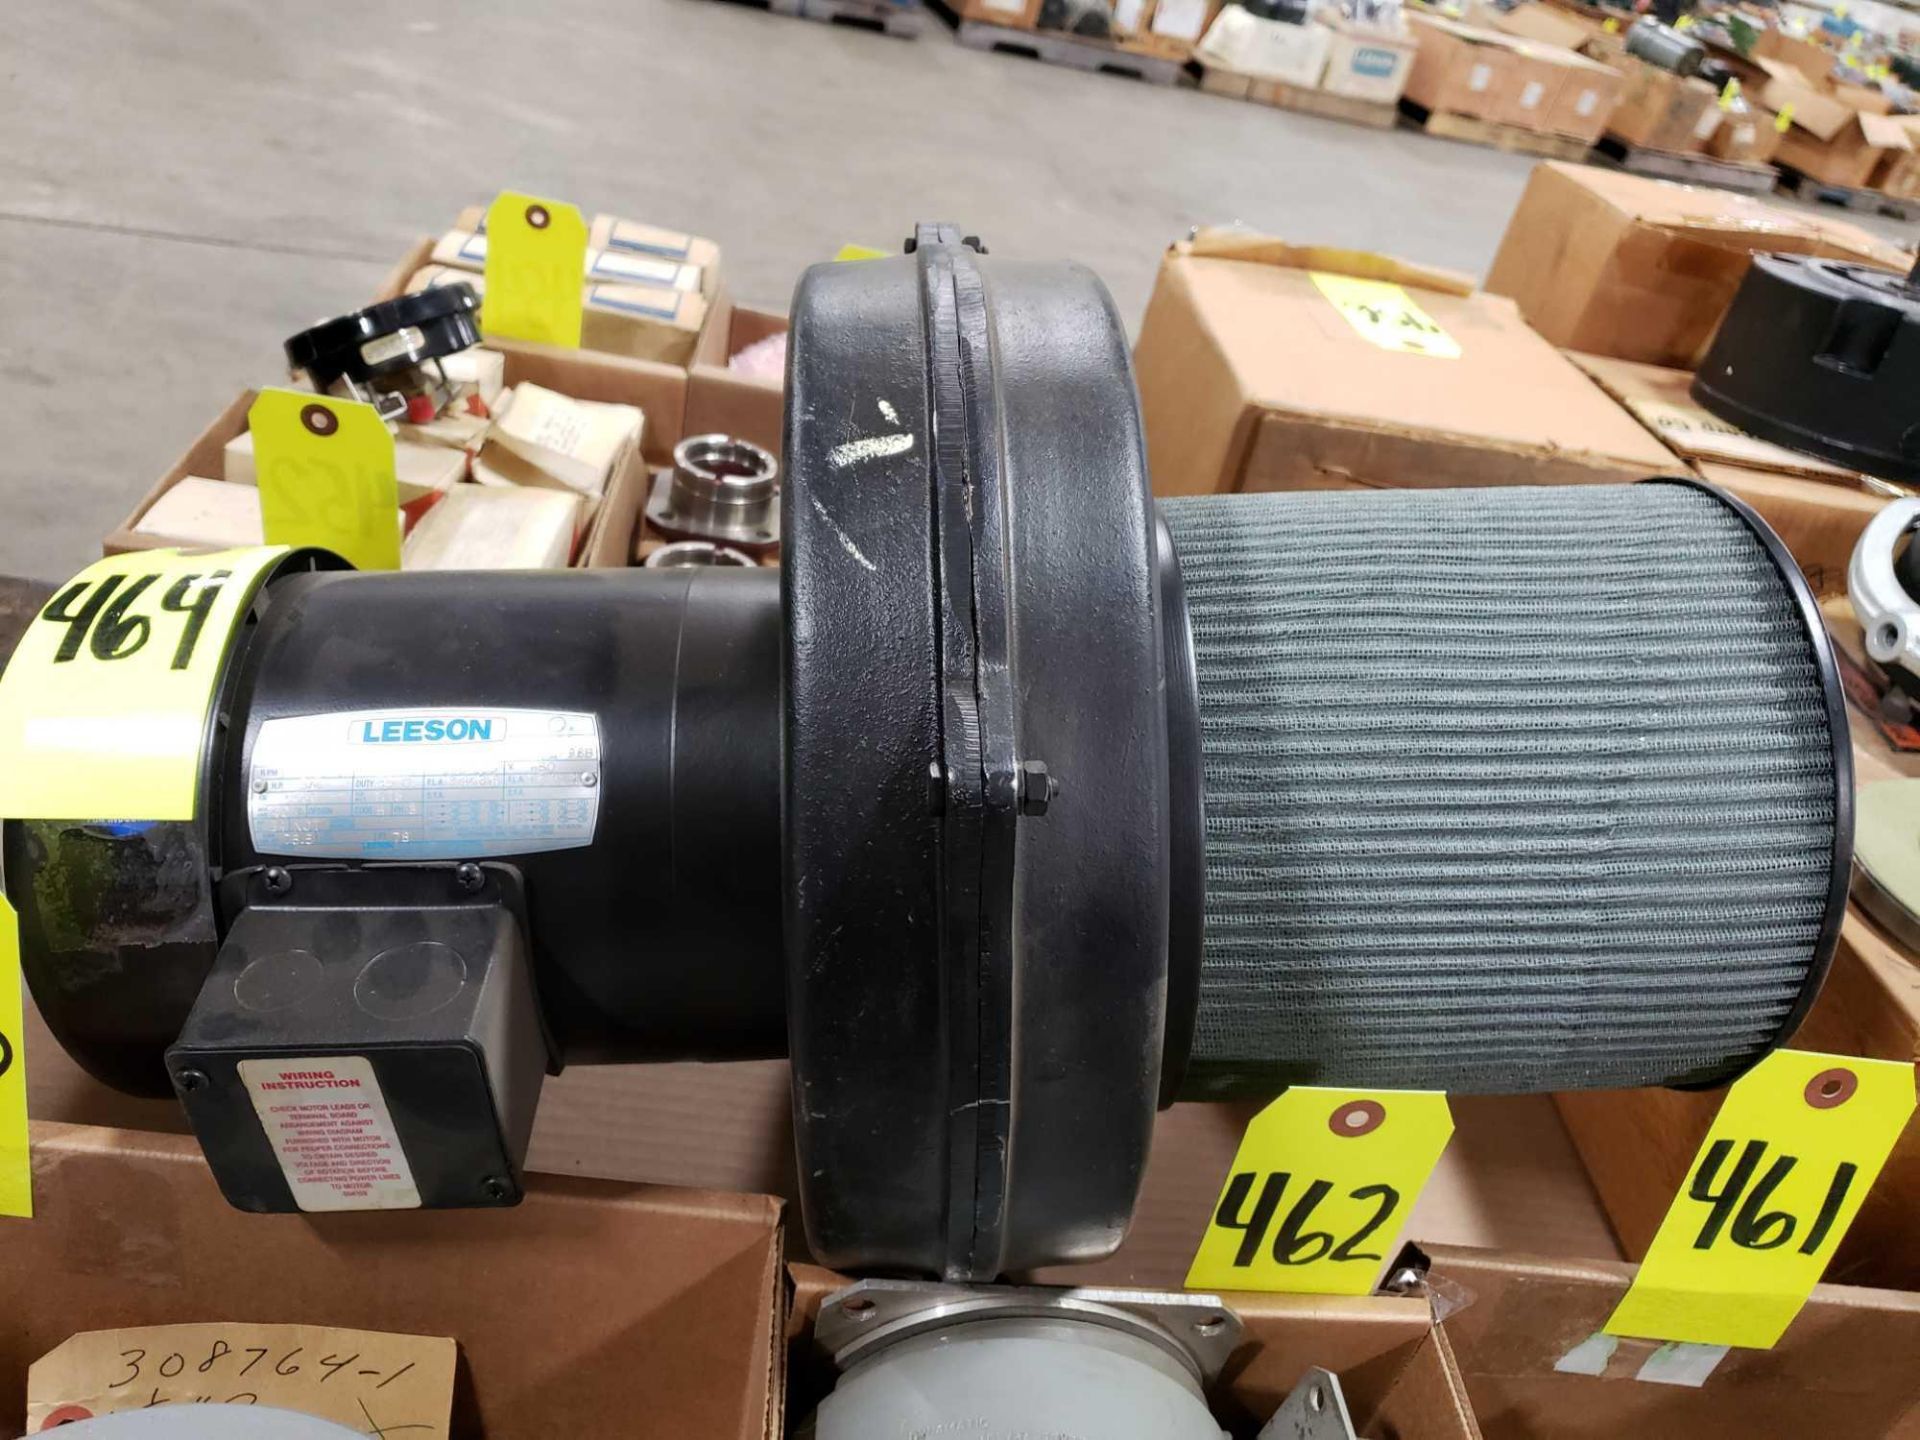 Powertec blower with leeson motor. New as pictured.